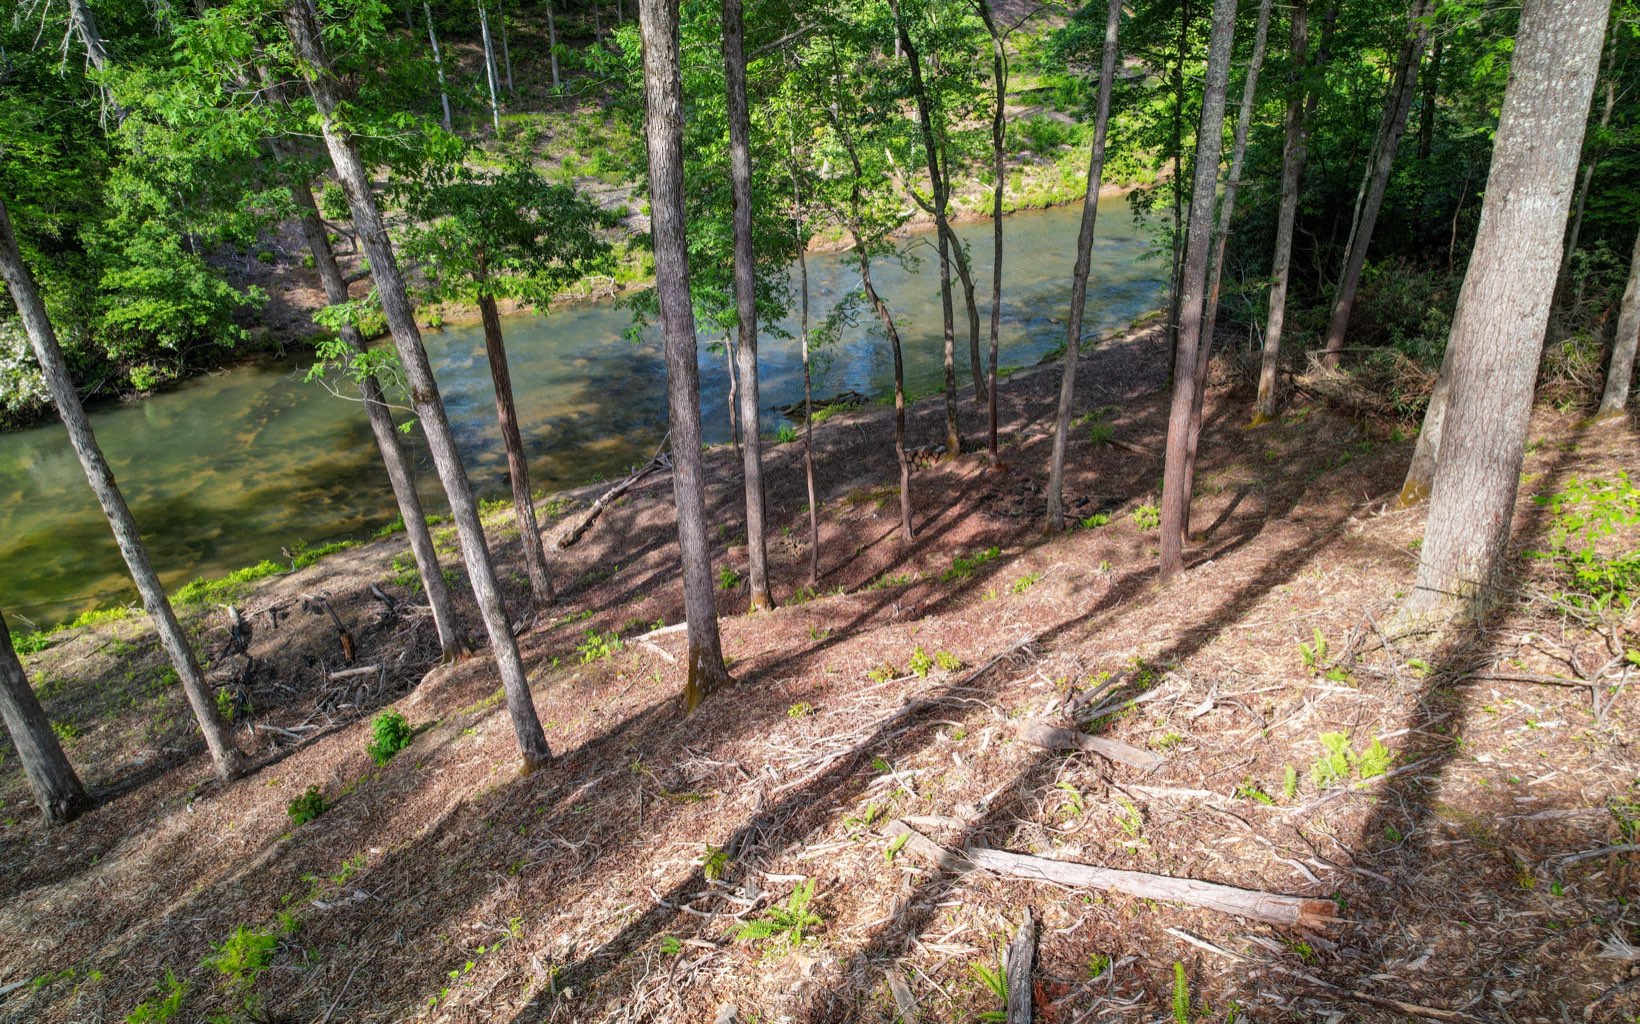 3.36 acres on Mountaintown Creek! Located in the beautiful High River Community, this waterfront lot is perfect and ready for you to come build your dream home. This property has so much to offer with deeded river access to the Coosawattee River, as well as having your own private access to the beautiful creek right out your back door! There is nothing like sitting on your porch, or around a fire listening to the creek as it flows, come check this one out for yourself it won't last long!